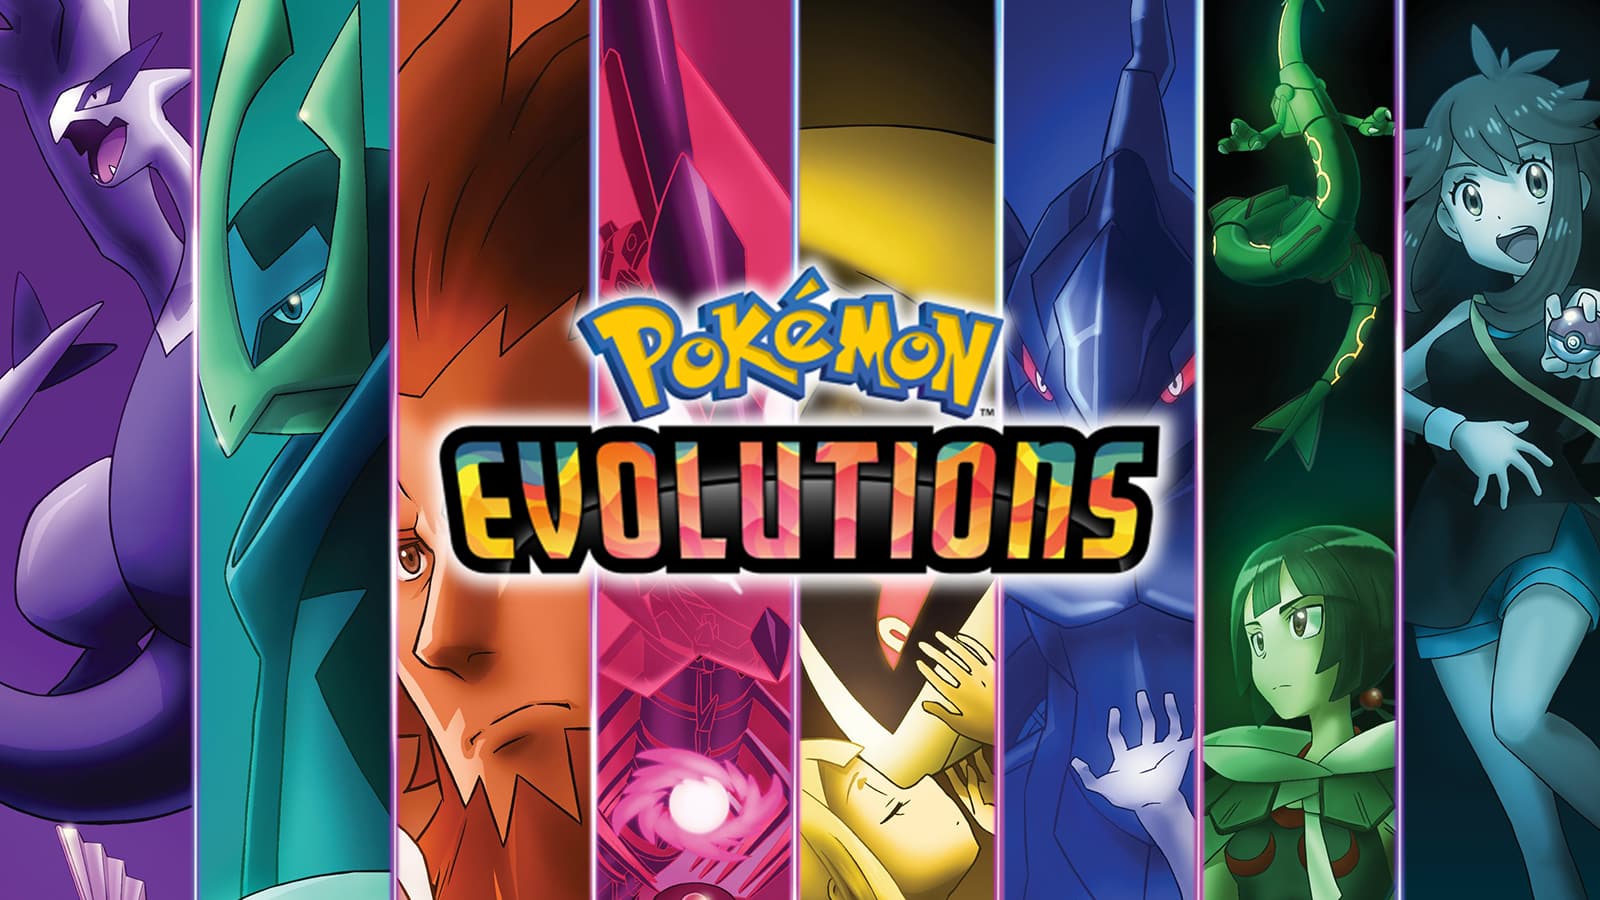 New Pokémon Evolutions Anime Series Visits All 8 Regions - Without Ash